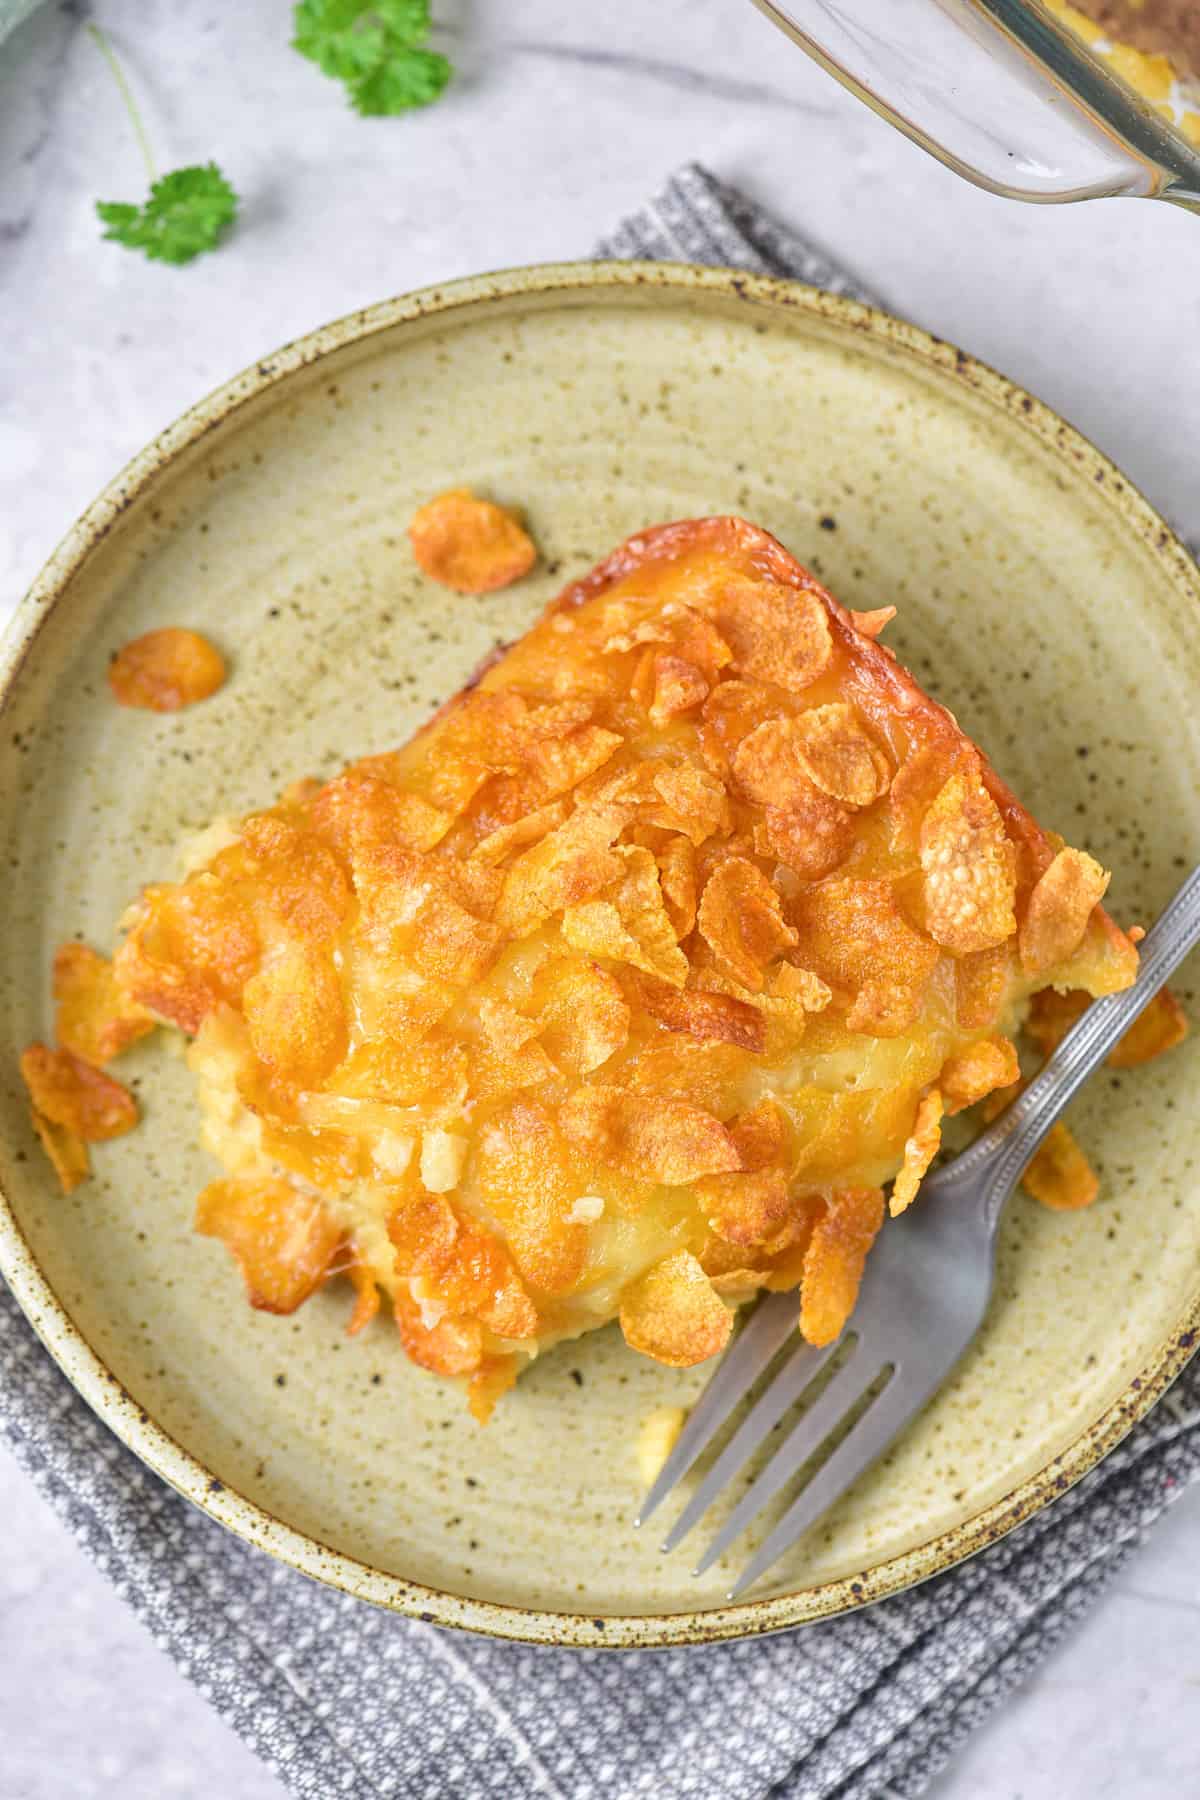 Looking down at a plate of hashbrown casserole topped with cornflakes and cheese.